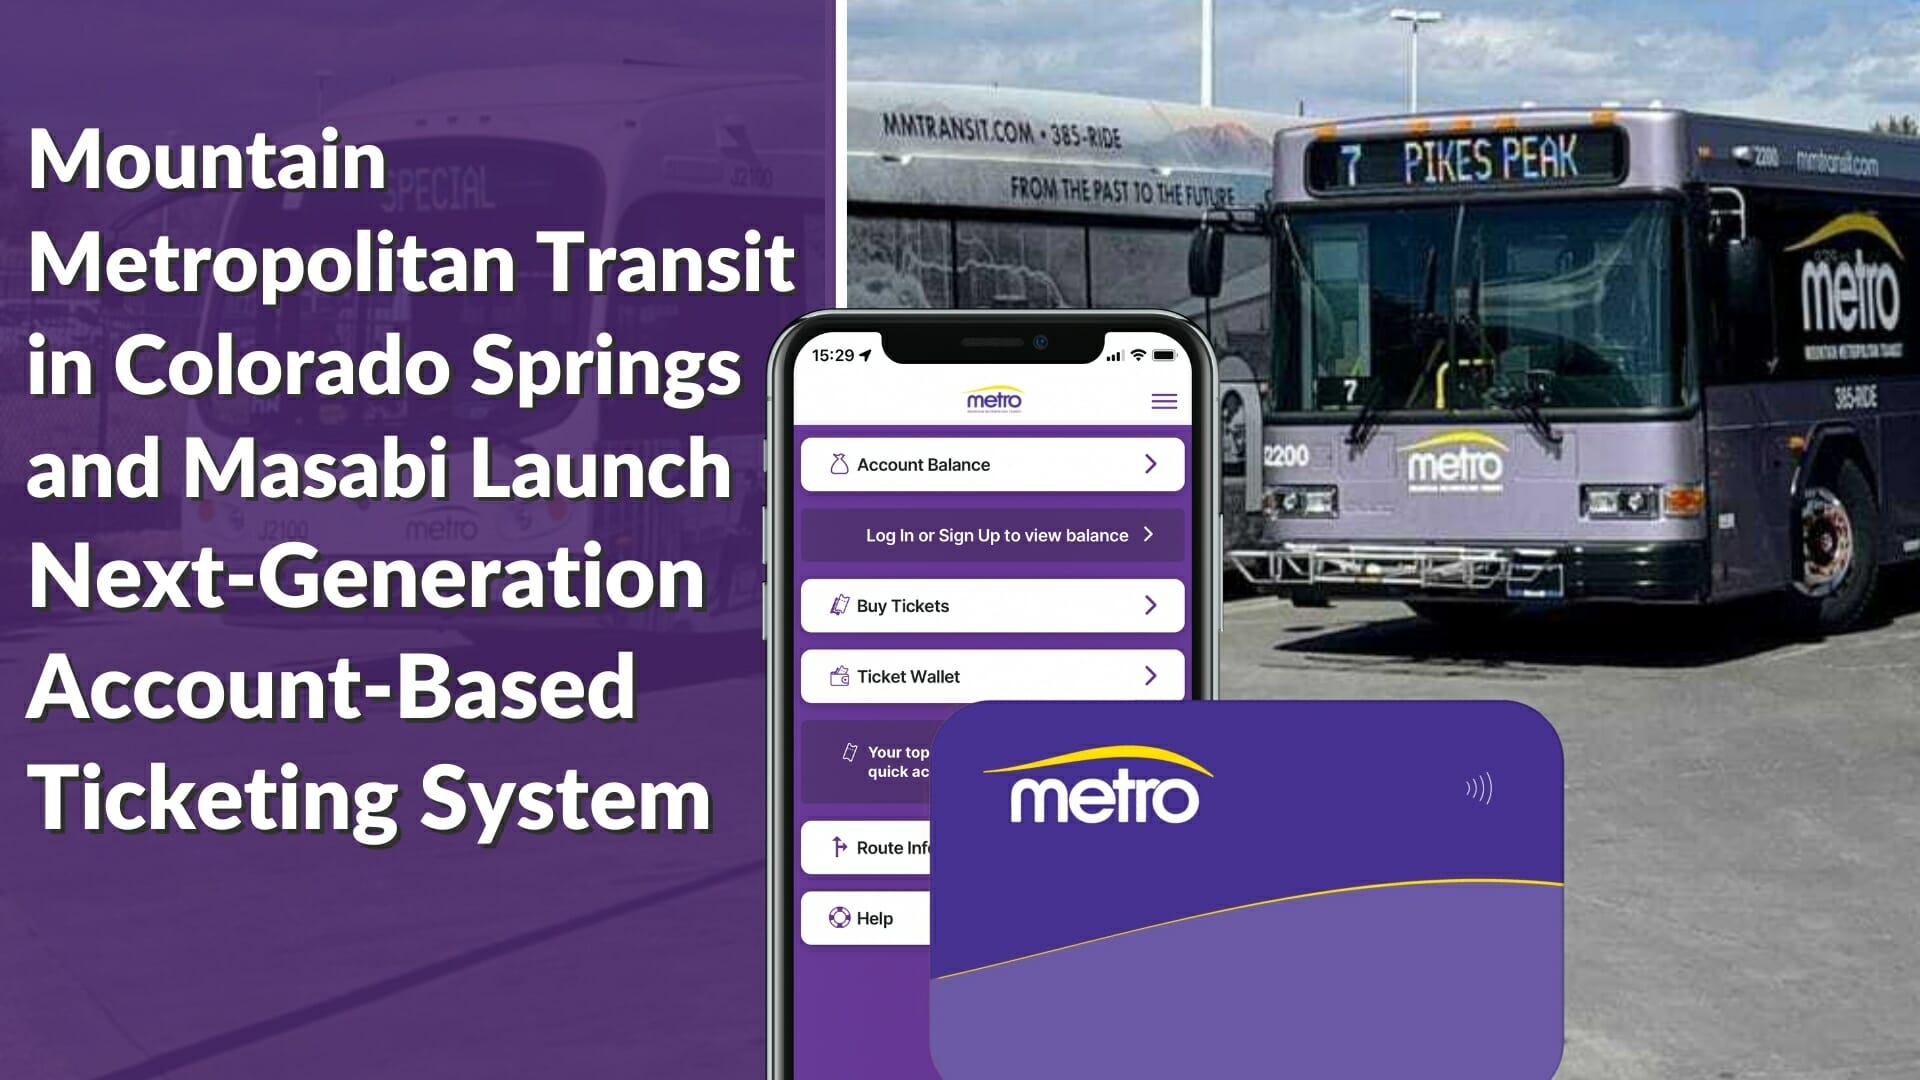 Mountain Metropolitan Transit in Colorado Springs and Masabi Launch Next-Generation Account-Based Ticketing System